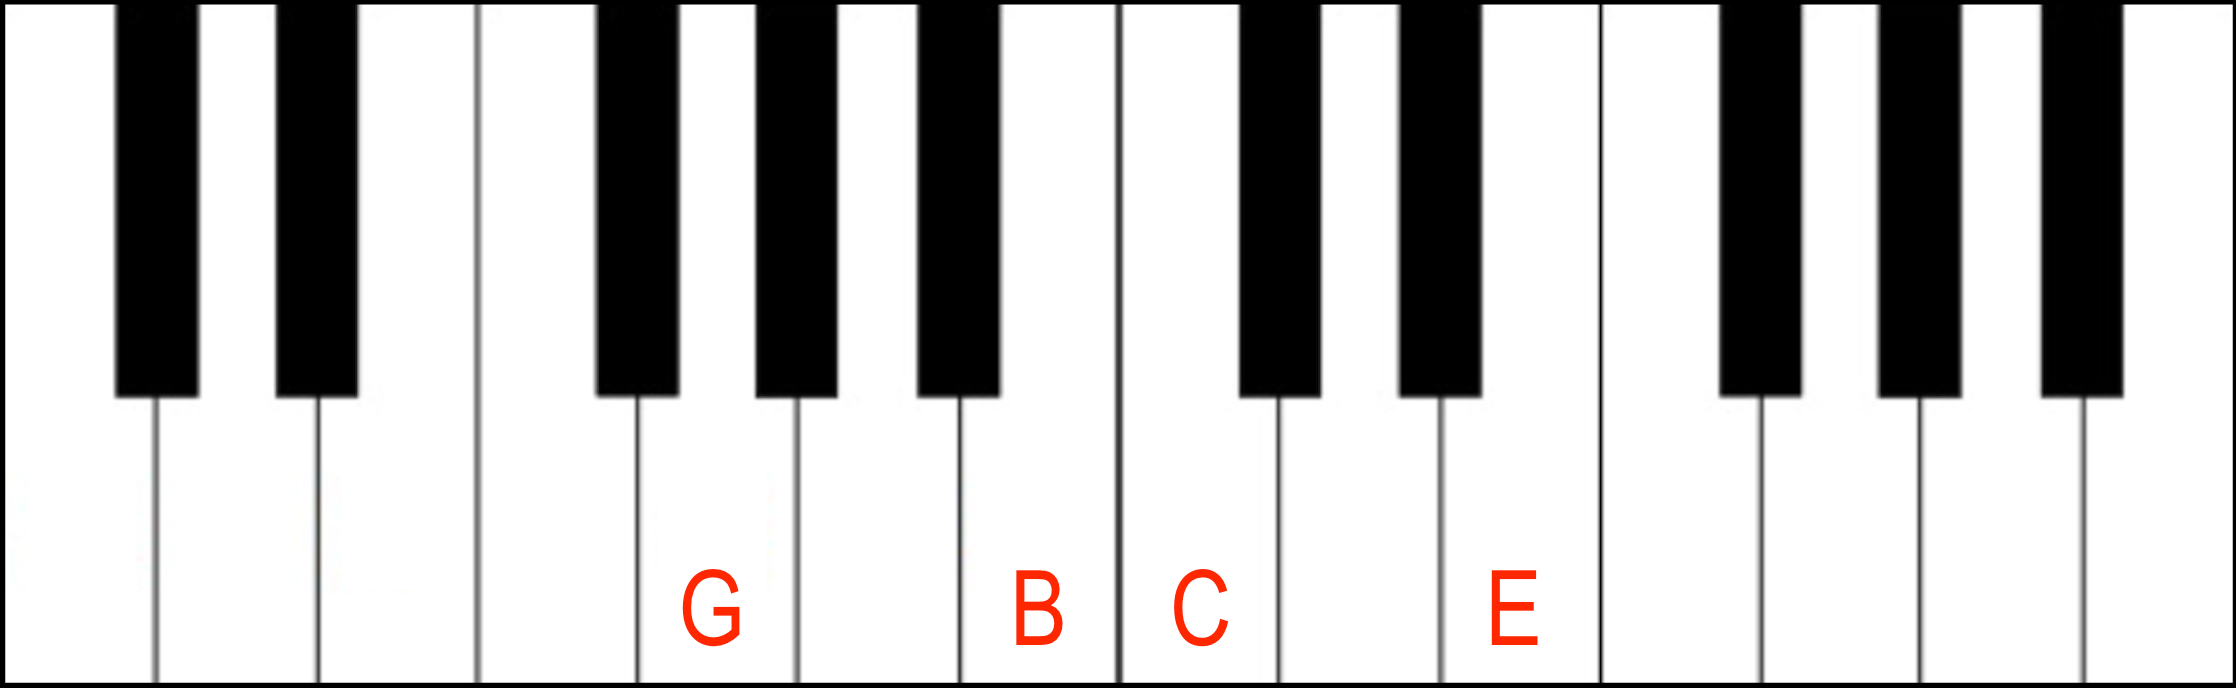 Jazz Piano Chords: Major 7th Piano Chord in second inversion